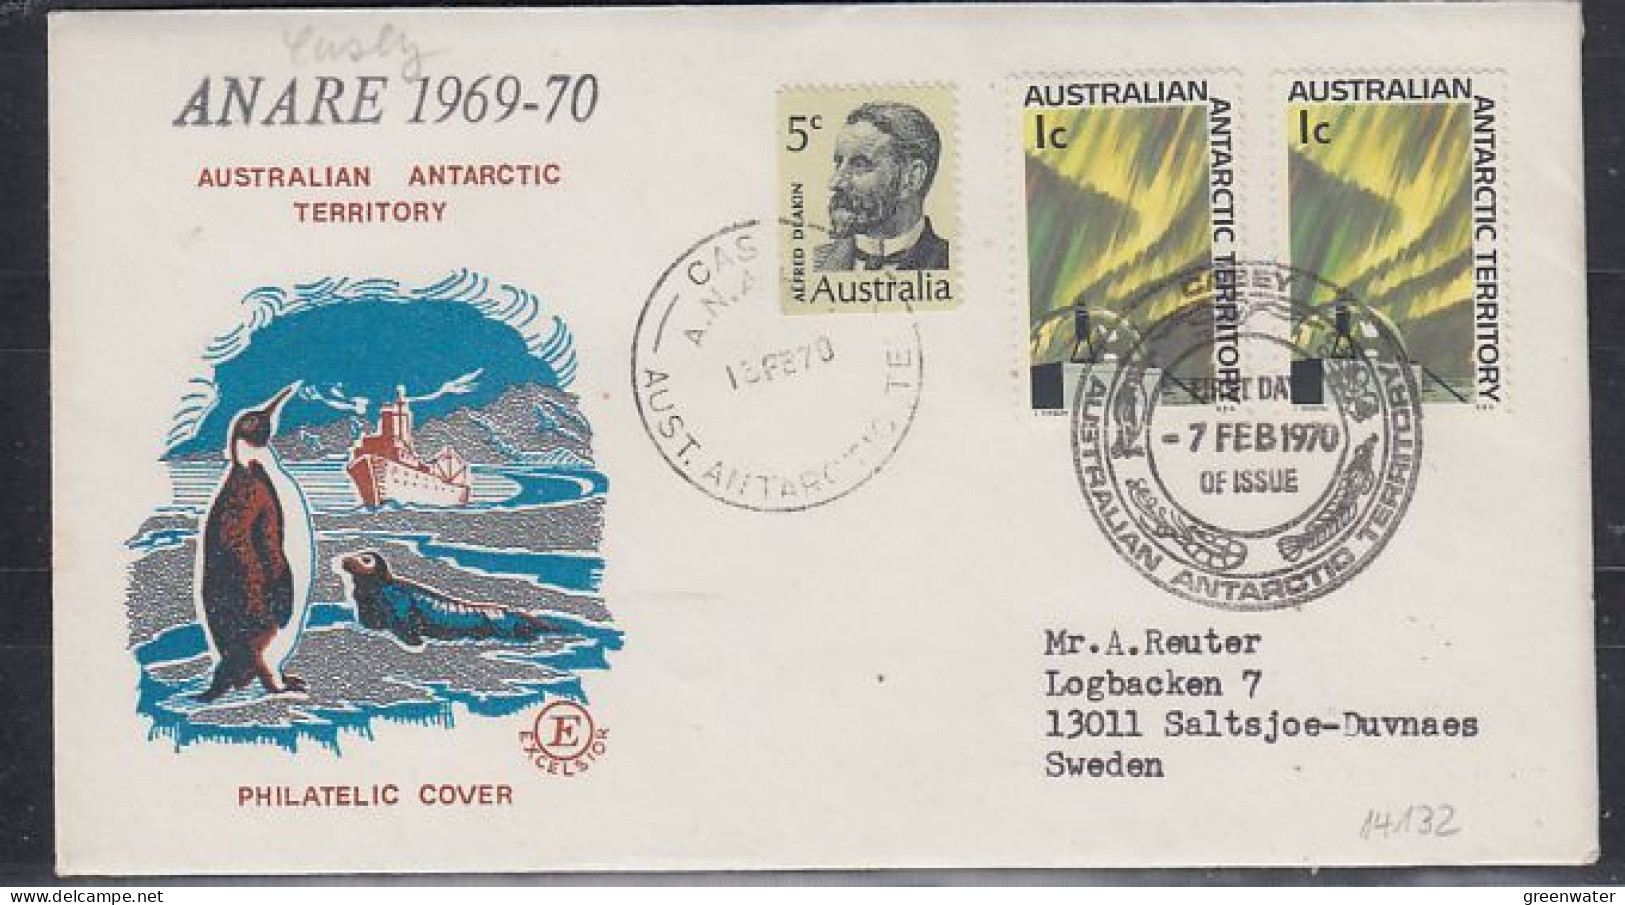 AAT Anare 1969-1970 Ca Casey  13 FEB 1970 (59774) - Lettres & Documents